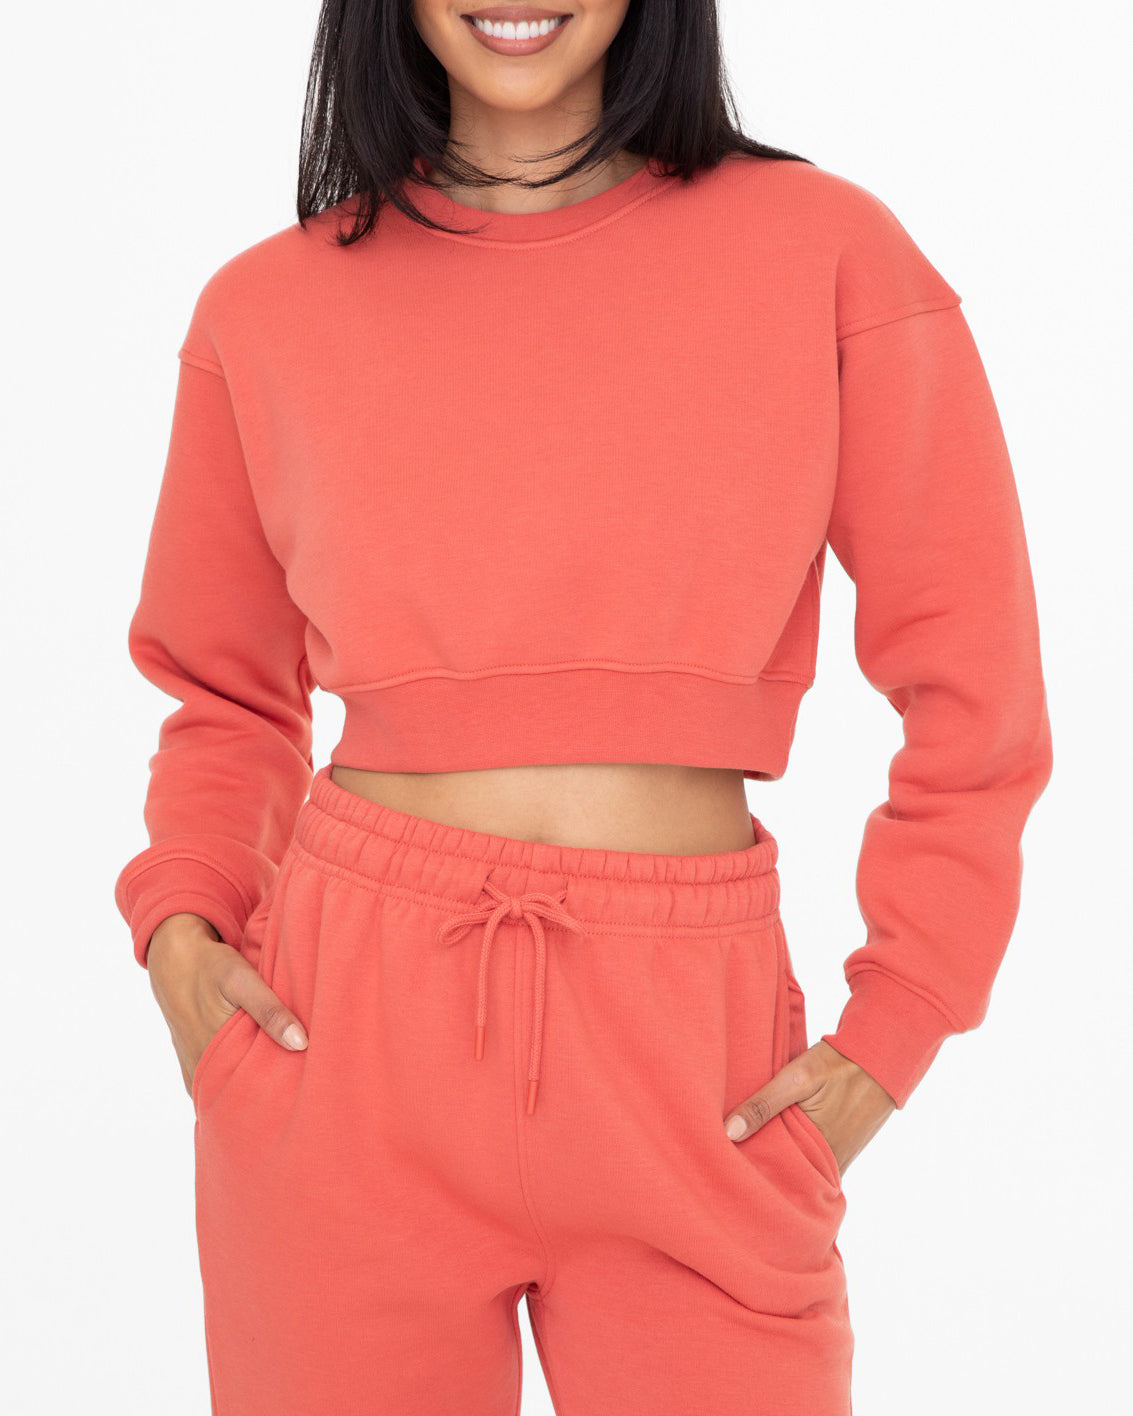 Leisure Love Cropped Crew Neck